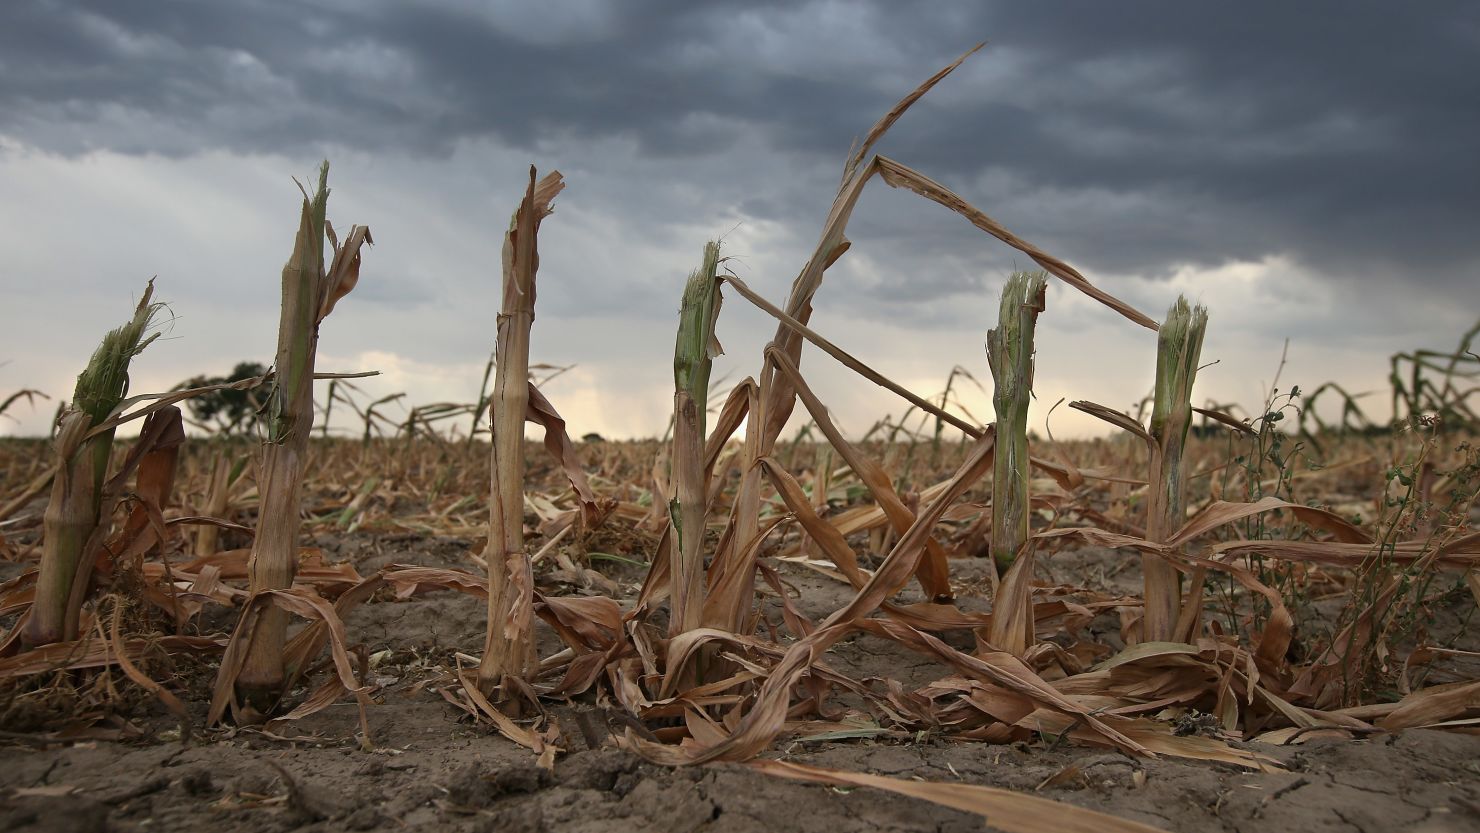 Rain clouds gather over the remnants of parched corn stalks on the plains of eastern Colorado, United States.